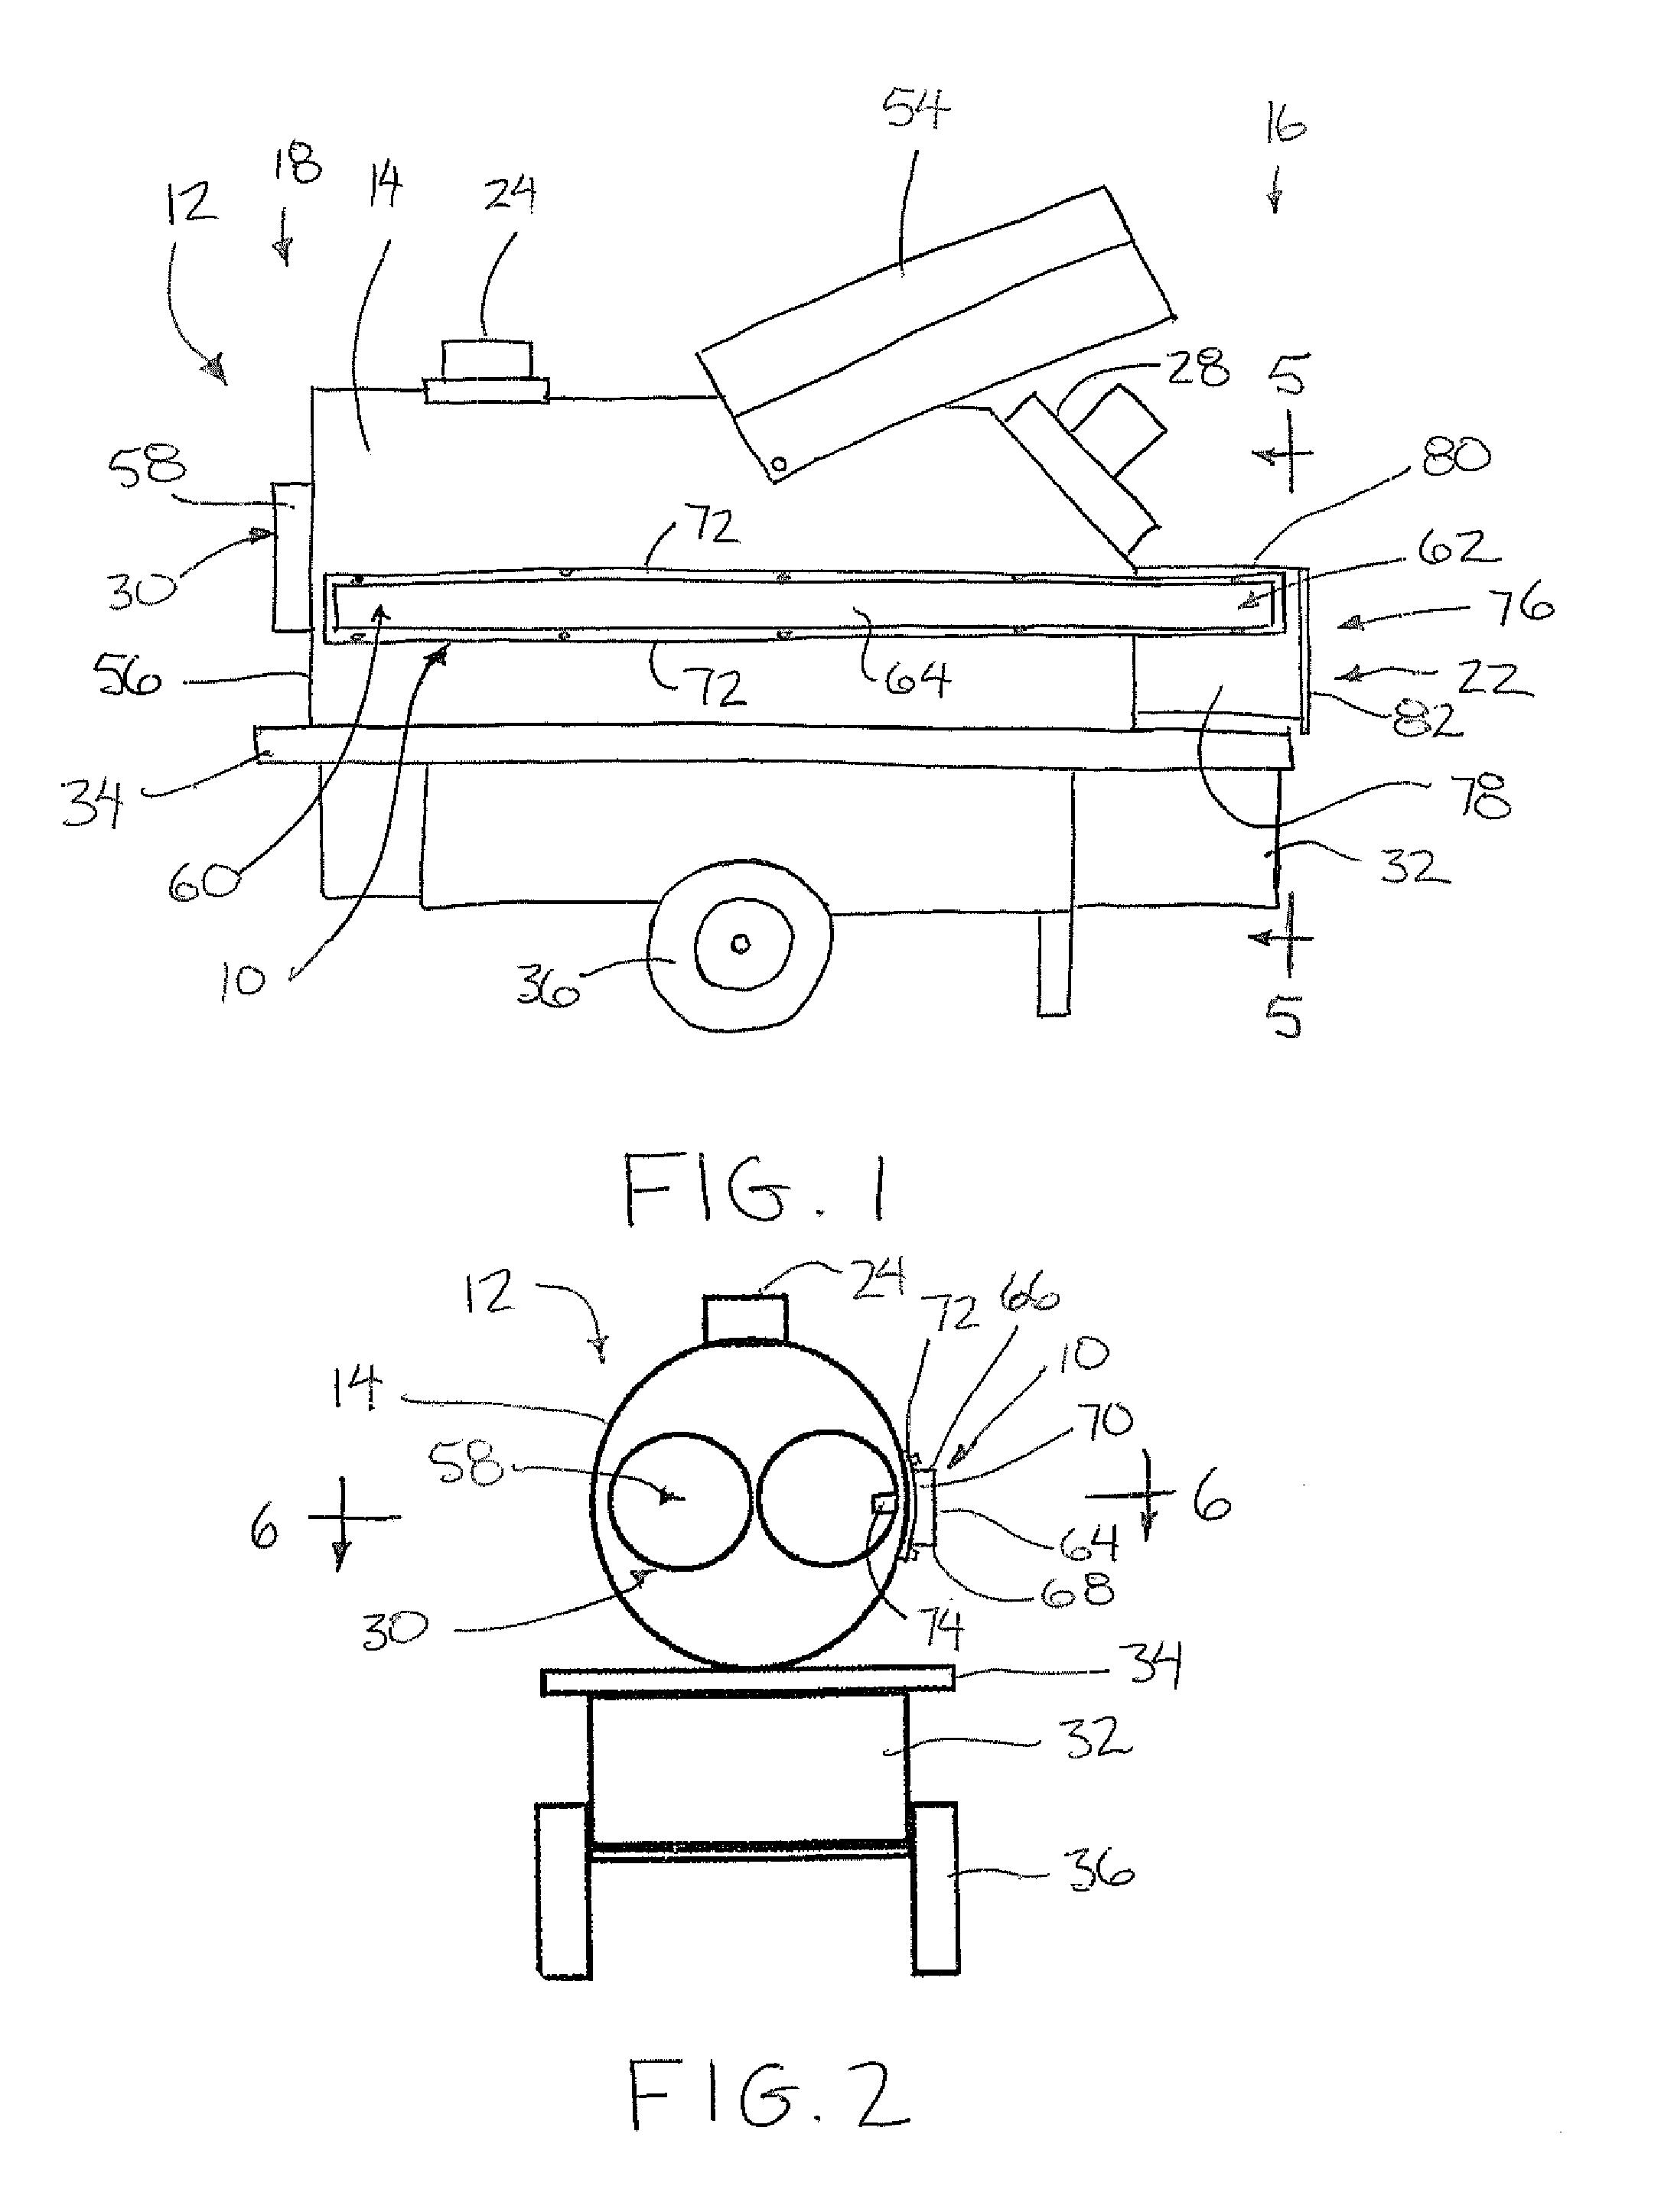 Auxiliary heating duct for an indirect fired heater